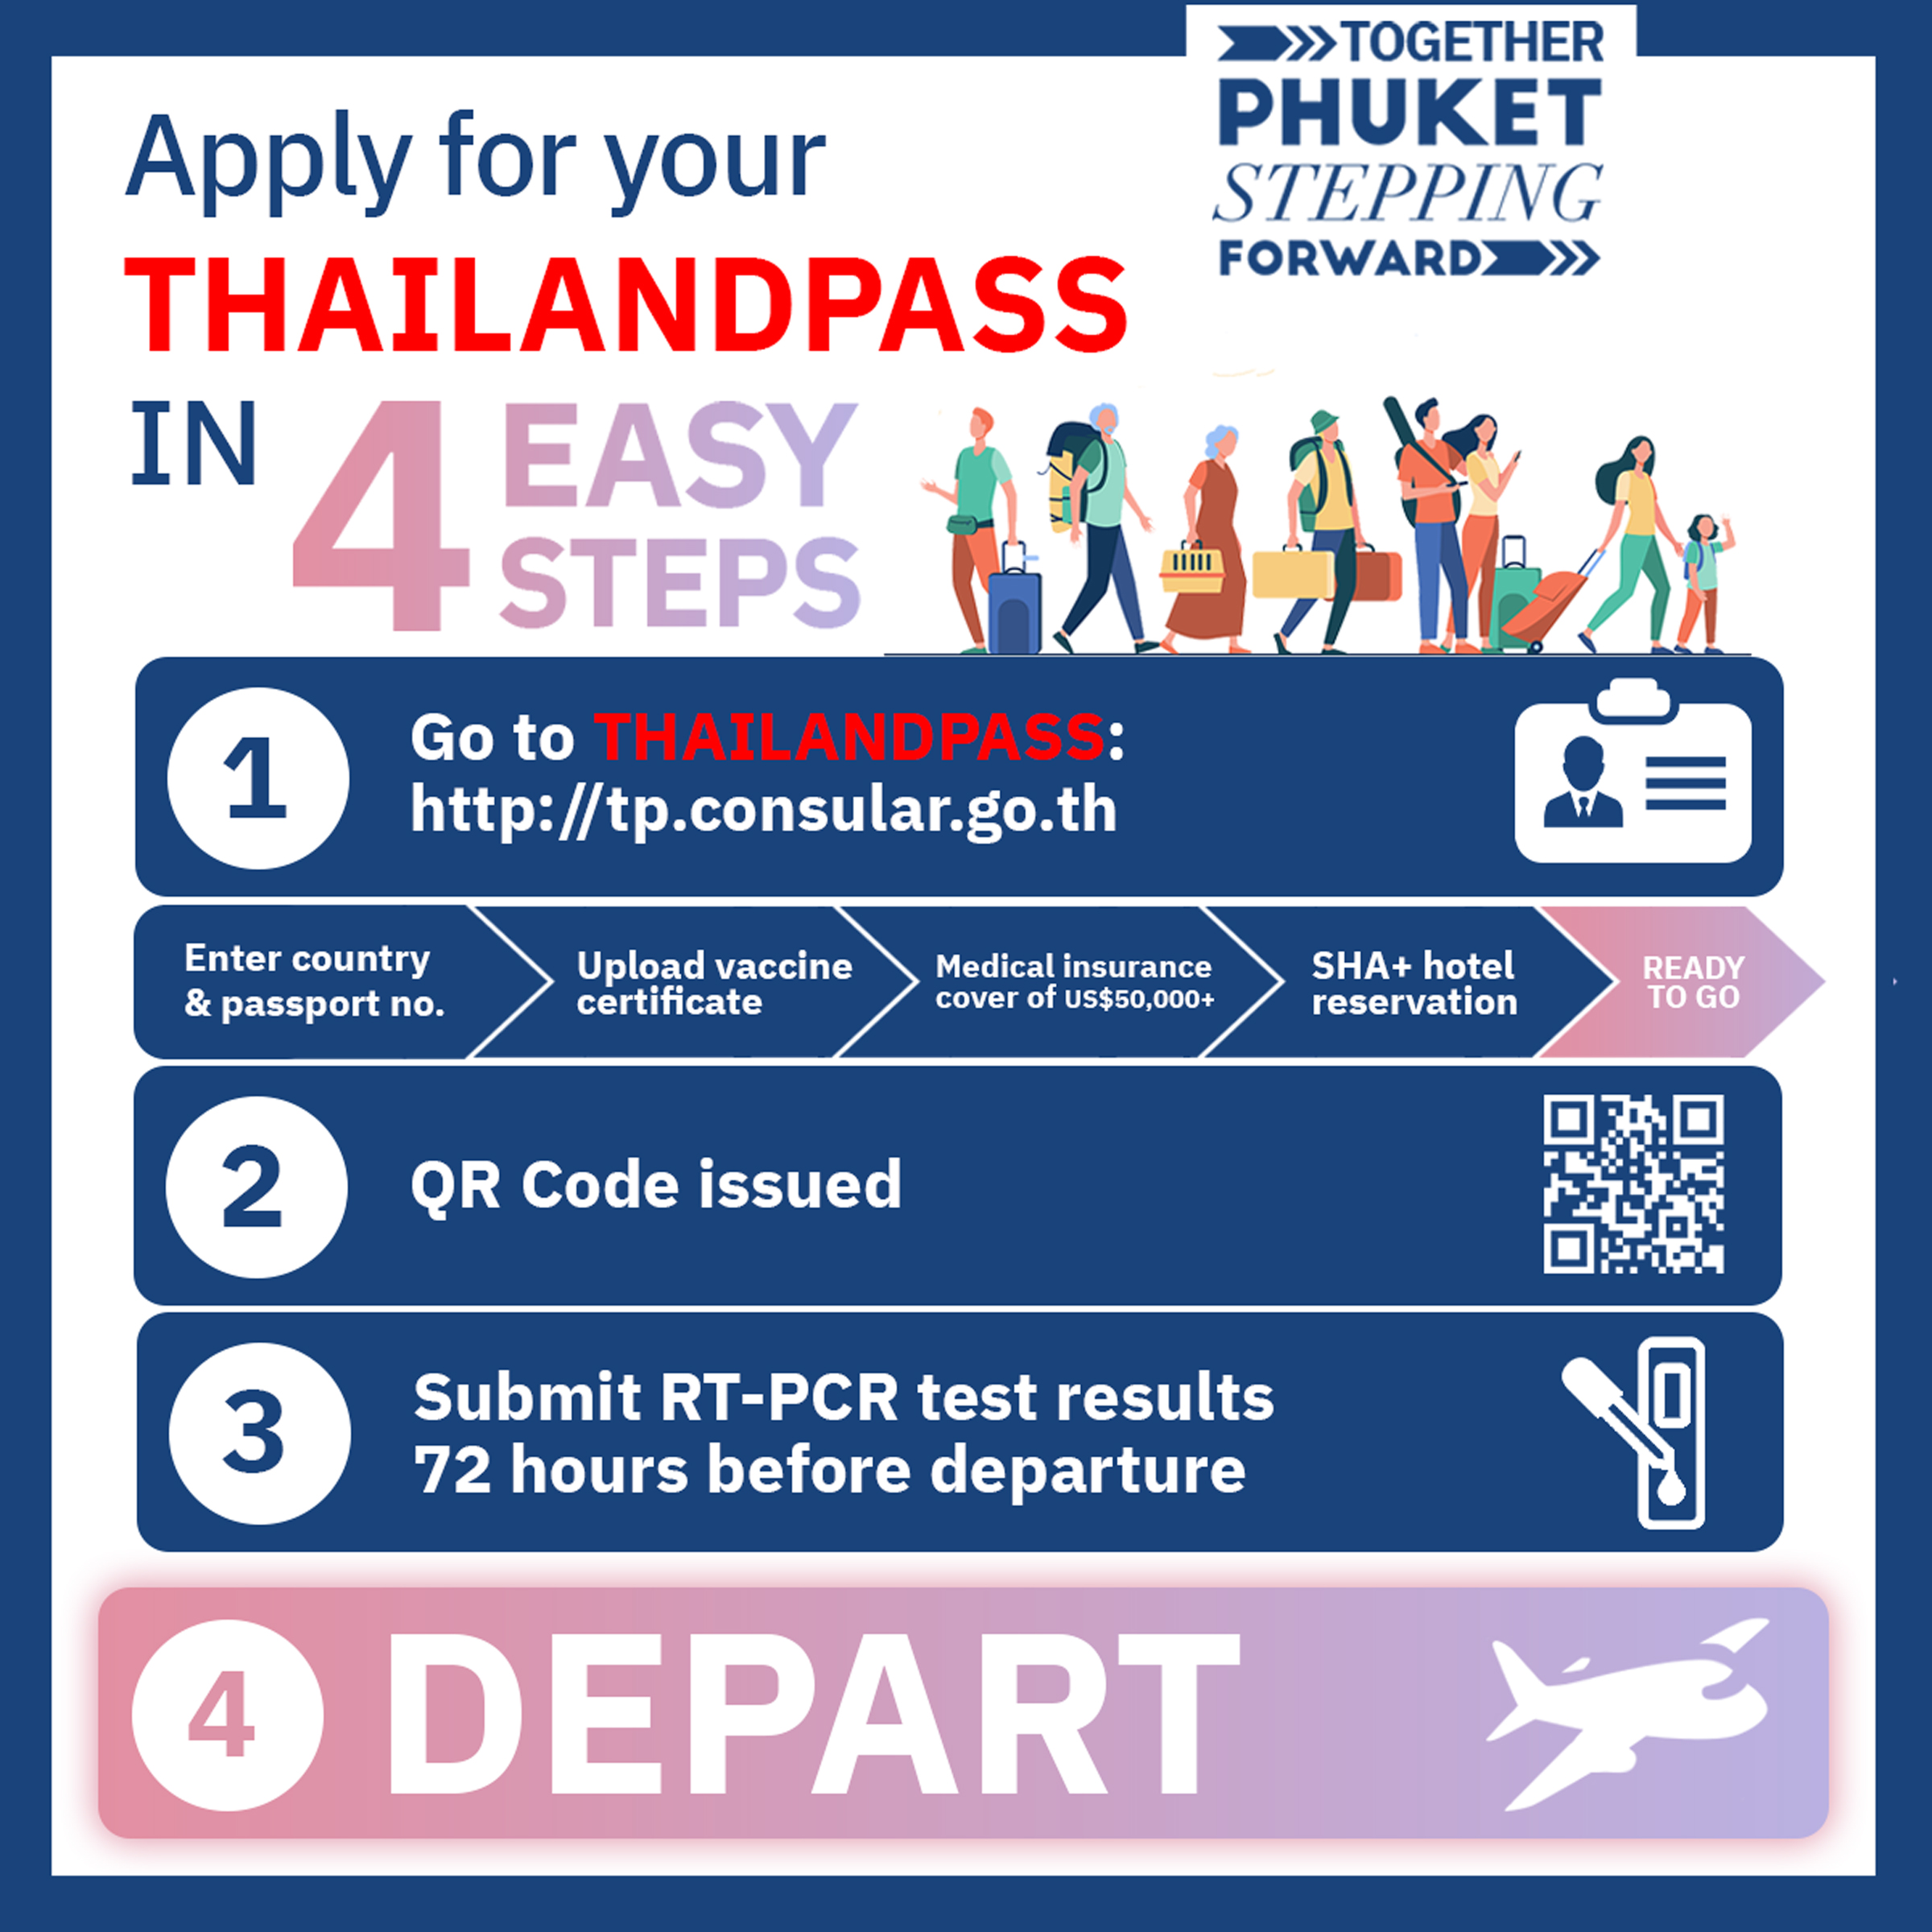 The Thailand Pass system is a free-of-charge web-based system designed to make the documentation process of travelers entering Thailand more efficient